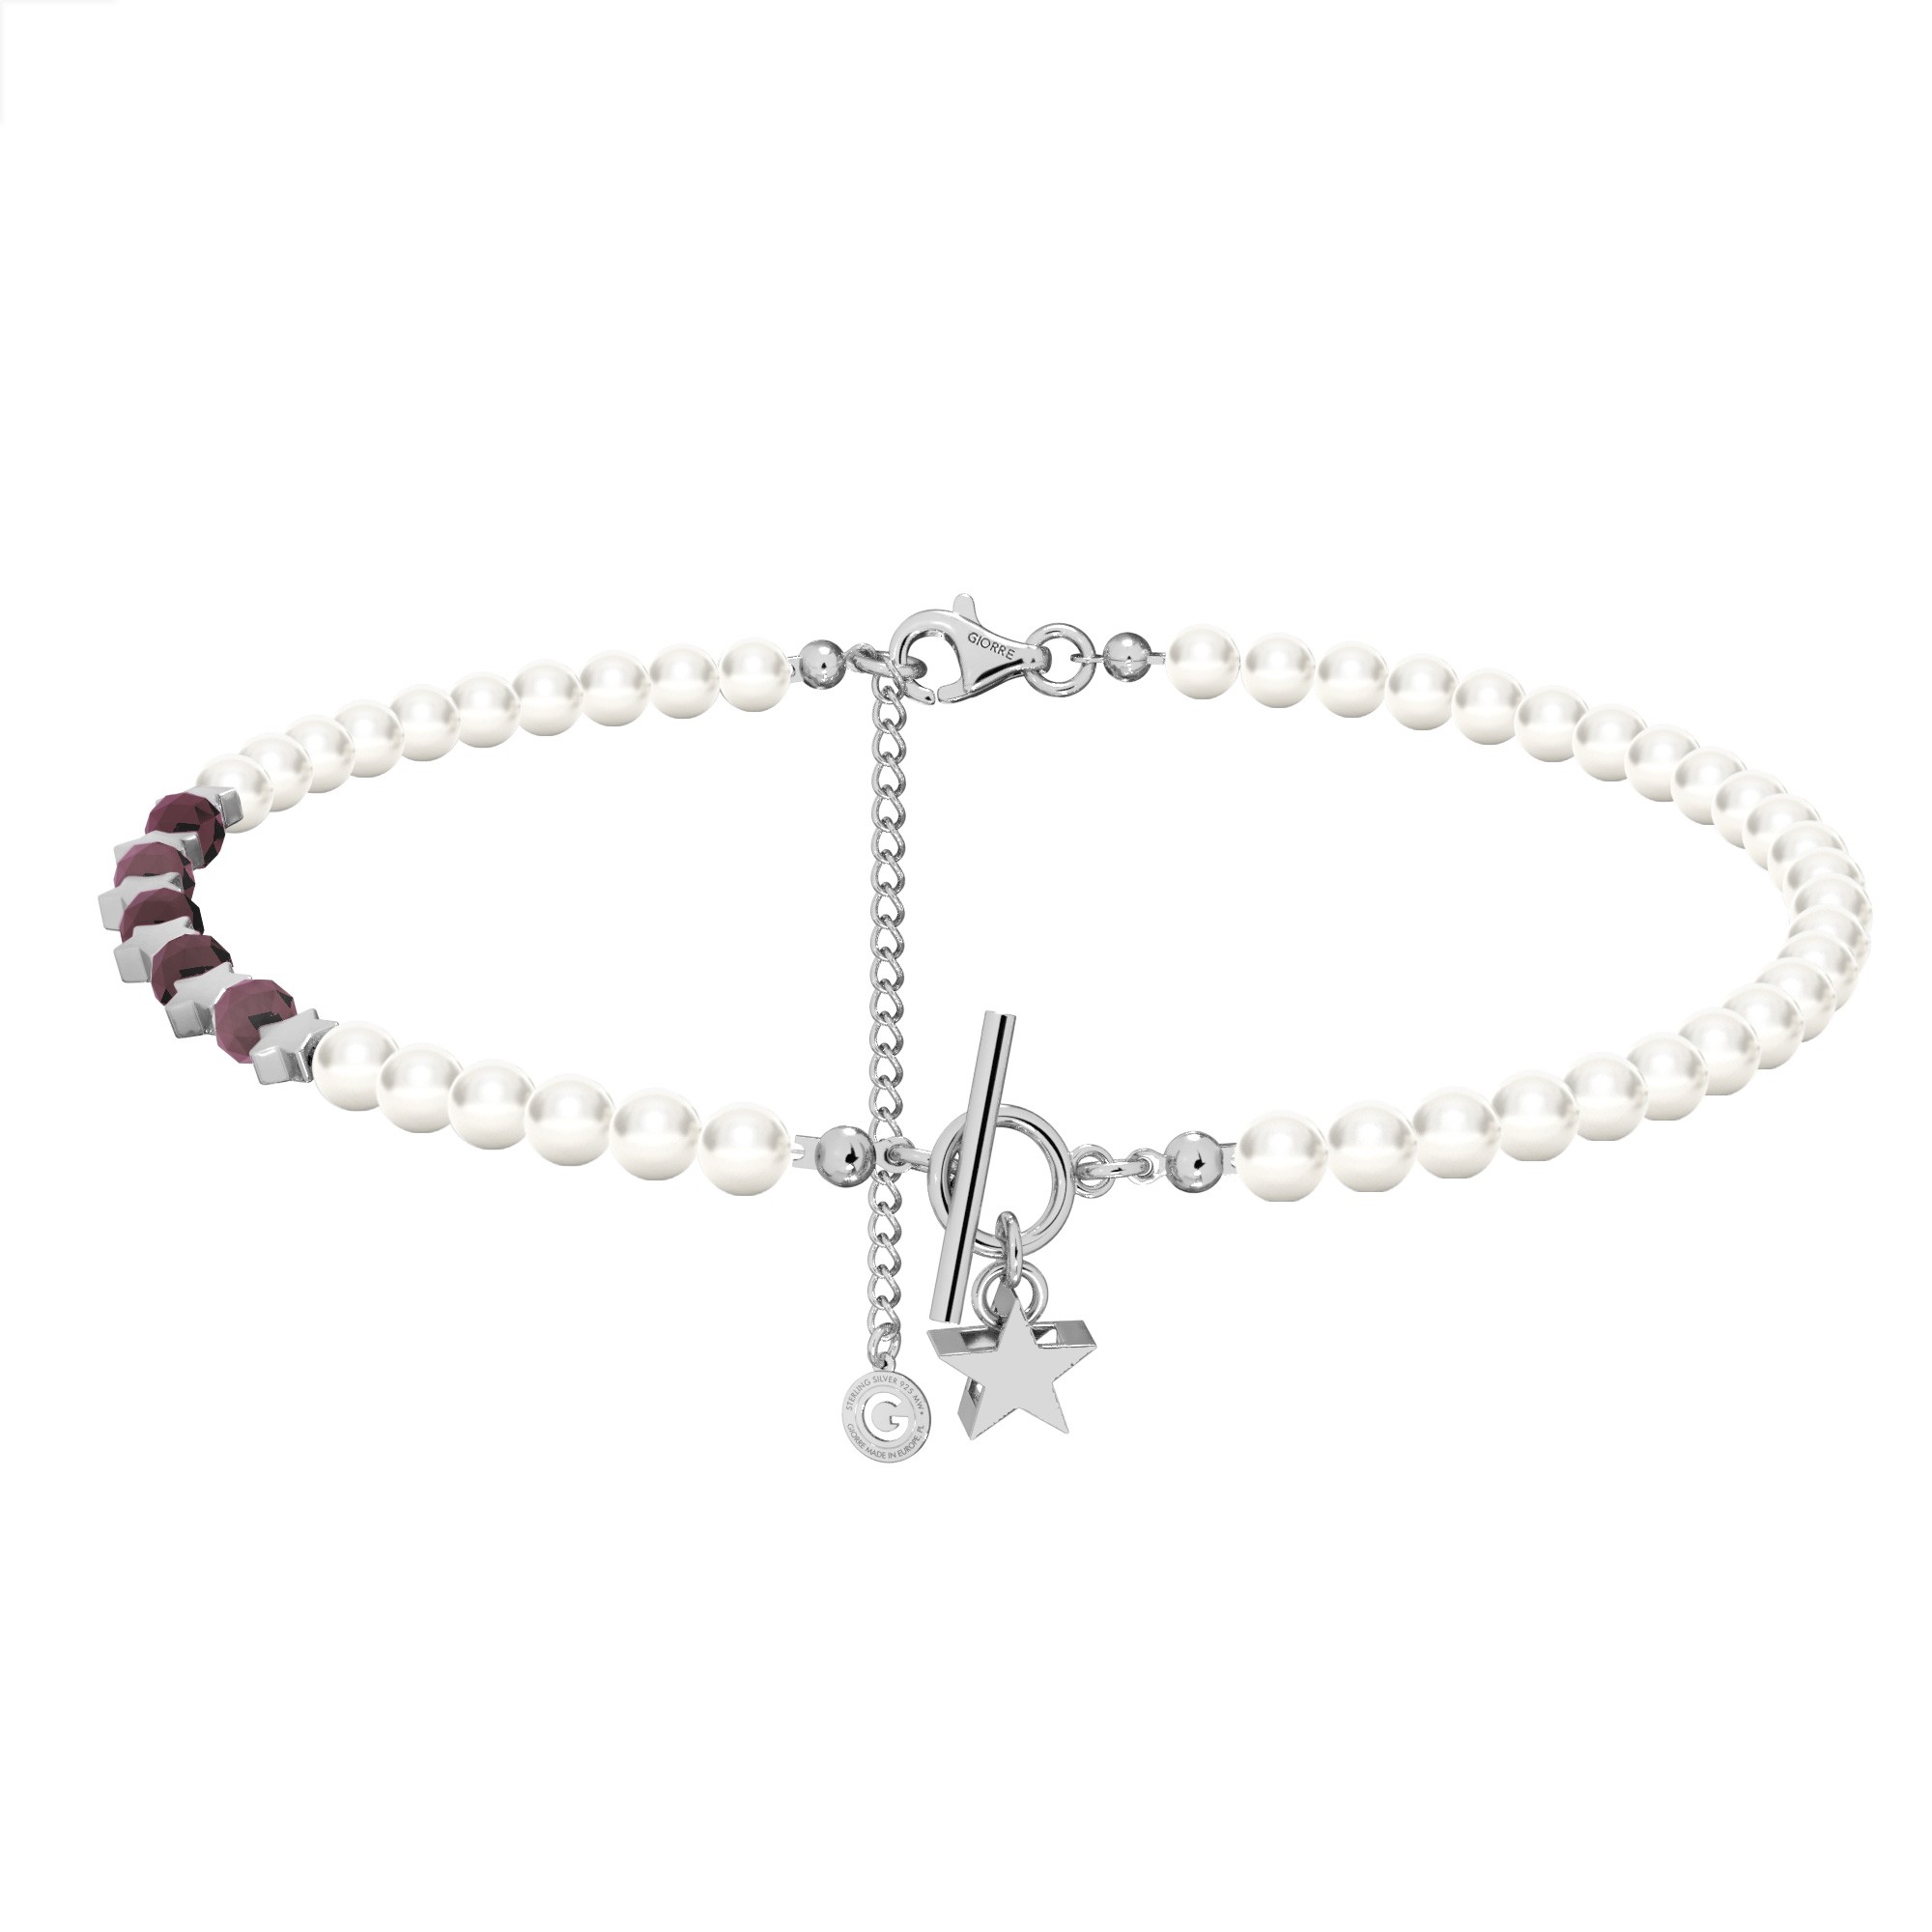 Ruby pearl choker with stars, sterling silver 925